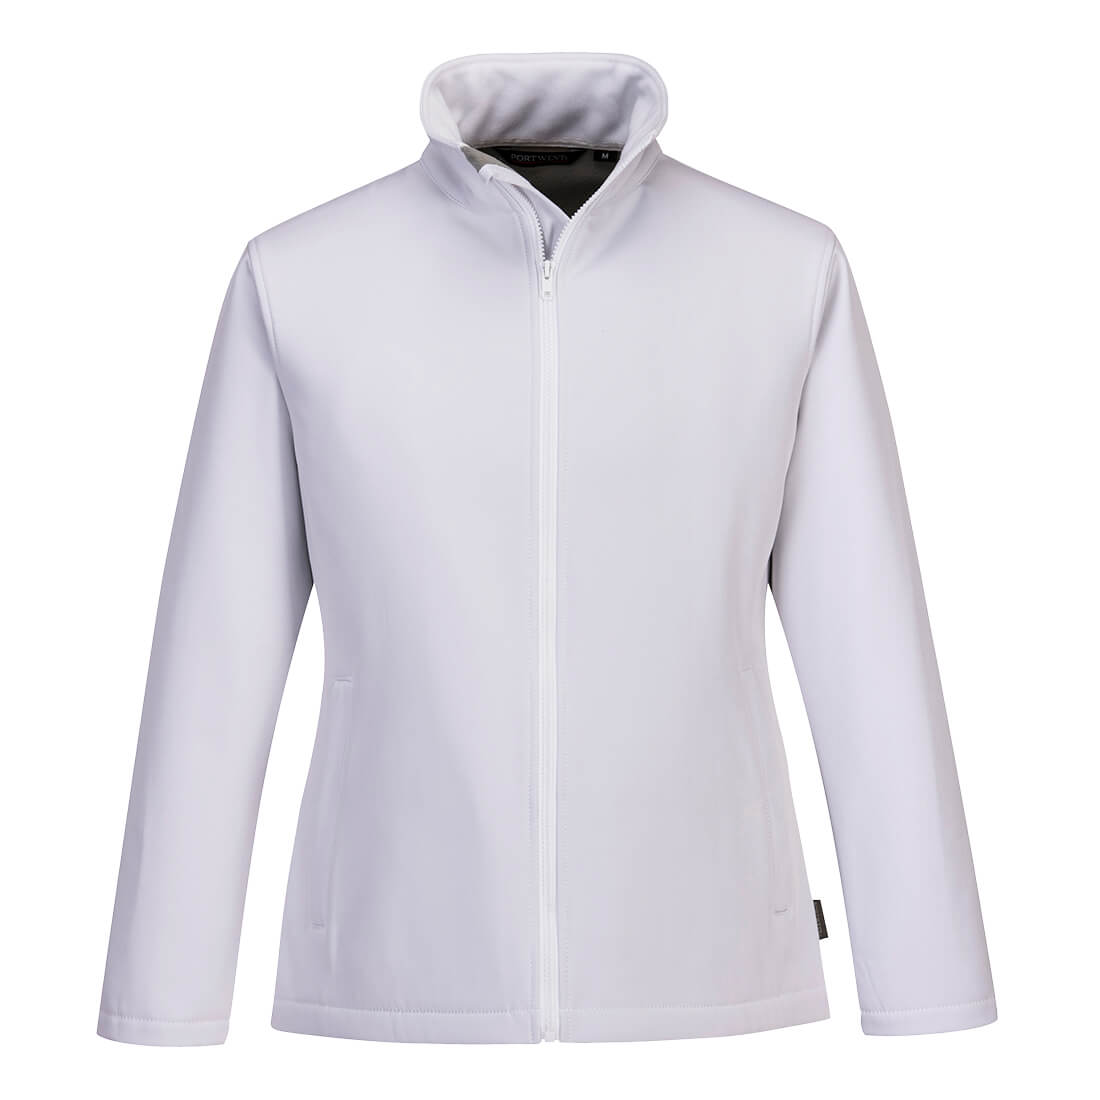 Women's Print and Promo Softshell (2L) TK21 White Size L Fit R